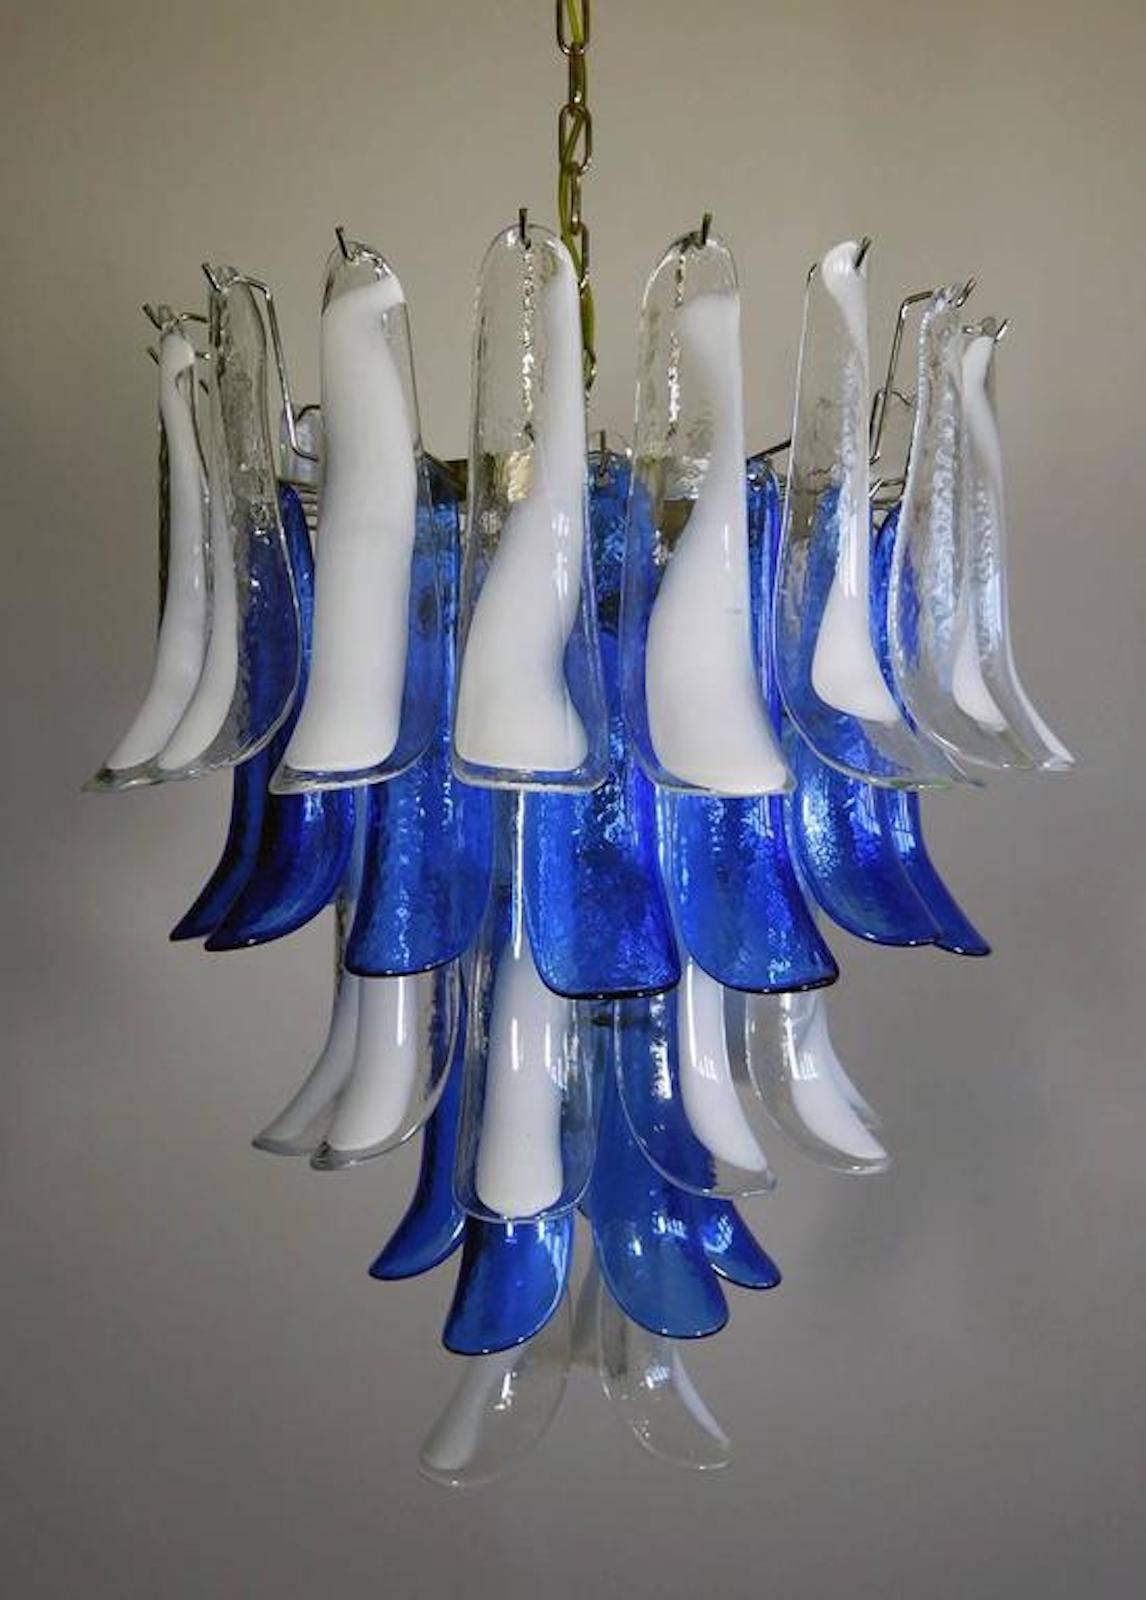 Each chandelier made by 52 glass petals in a chrome frame. The glasses have two colors:
31 glass petals transparent and white “lattimo” +21 glass petals blue color. As you can see from the photos the
glass petals are interchangeable as you like in